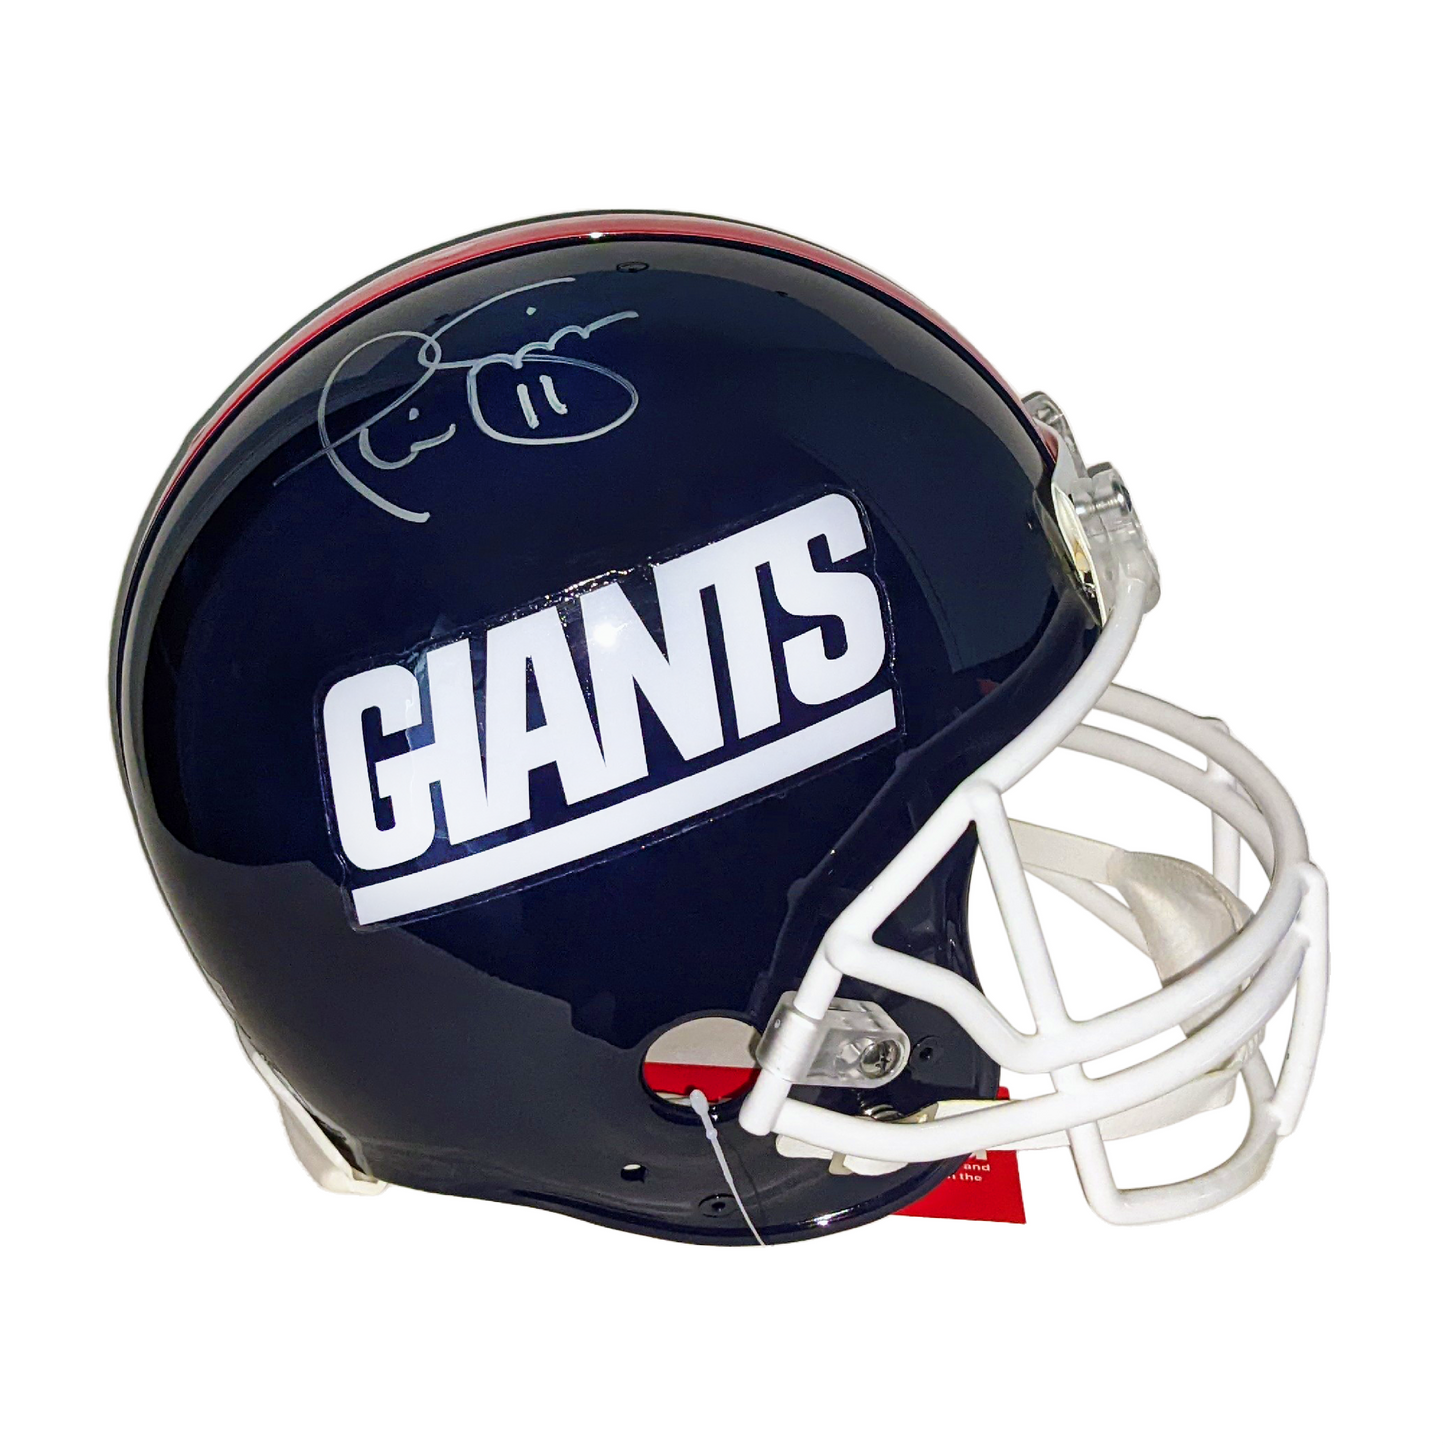 Phil Simms Autographed Hand Signed New York Giants VSR4 Full Size Authentic Pro Football Helmet - Fanatics Authentication